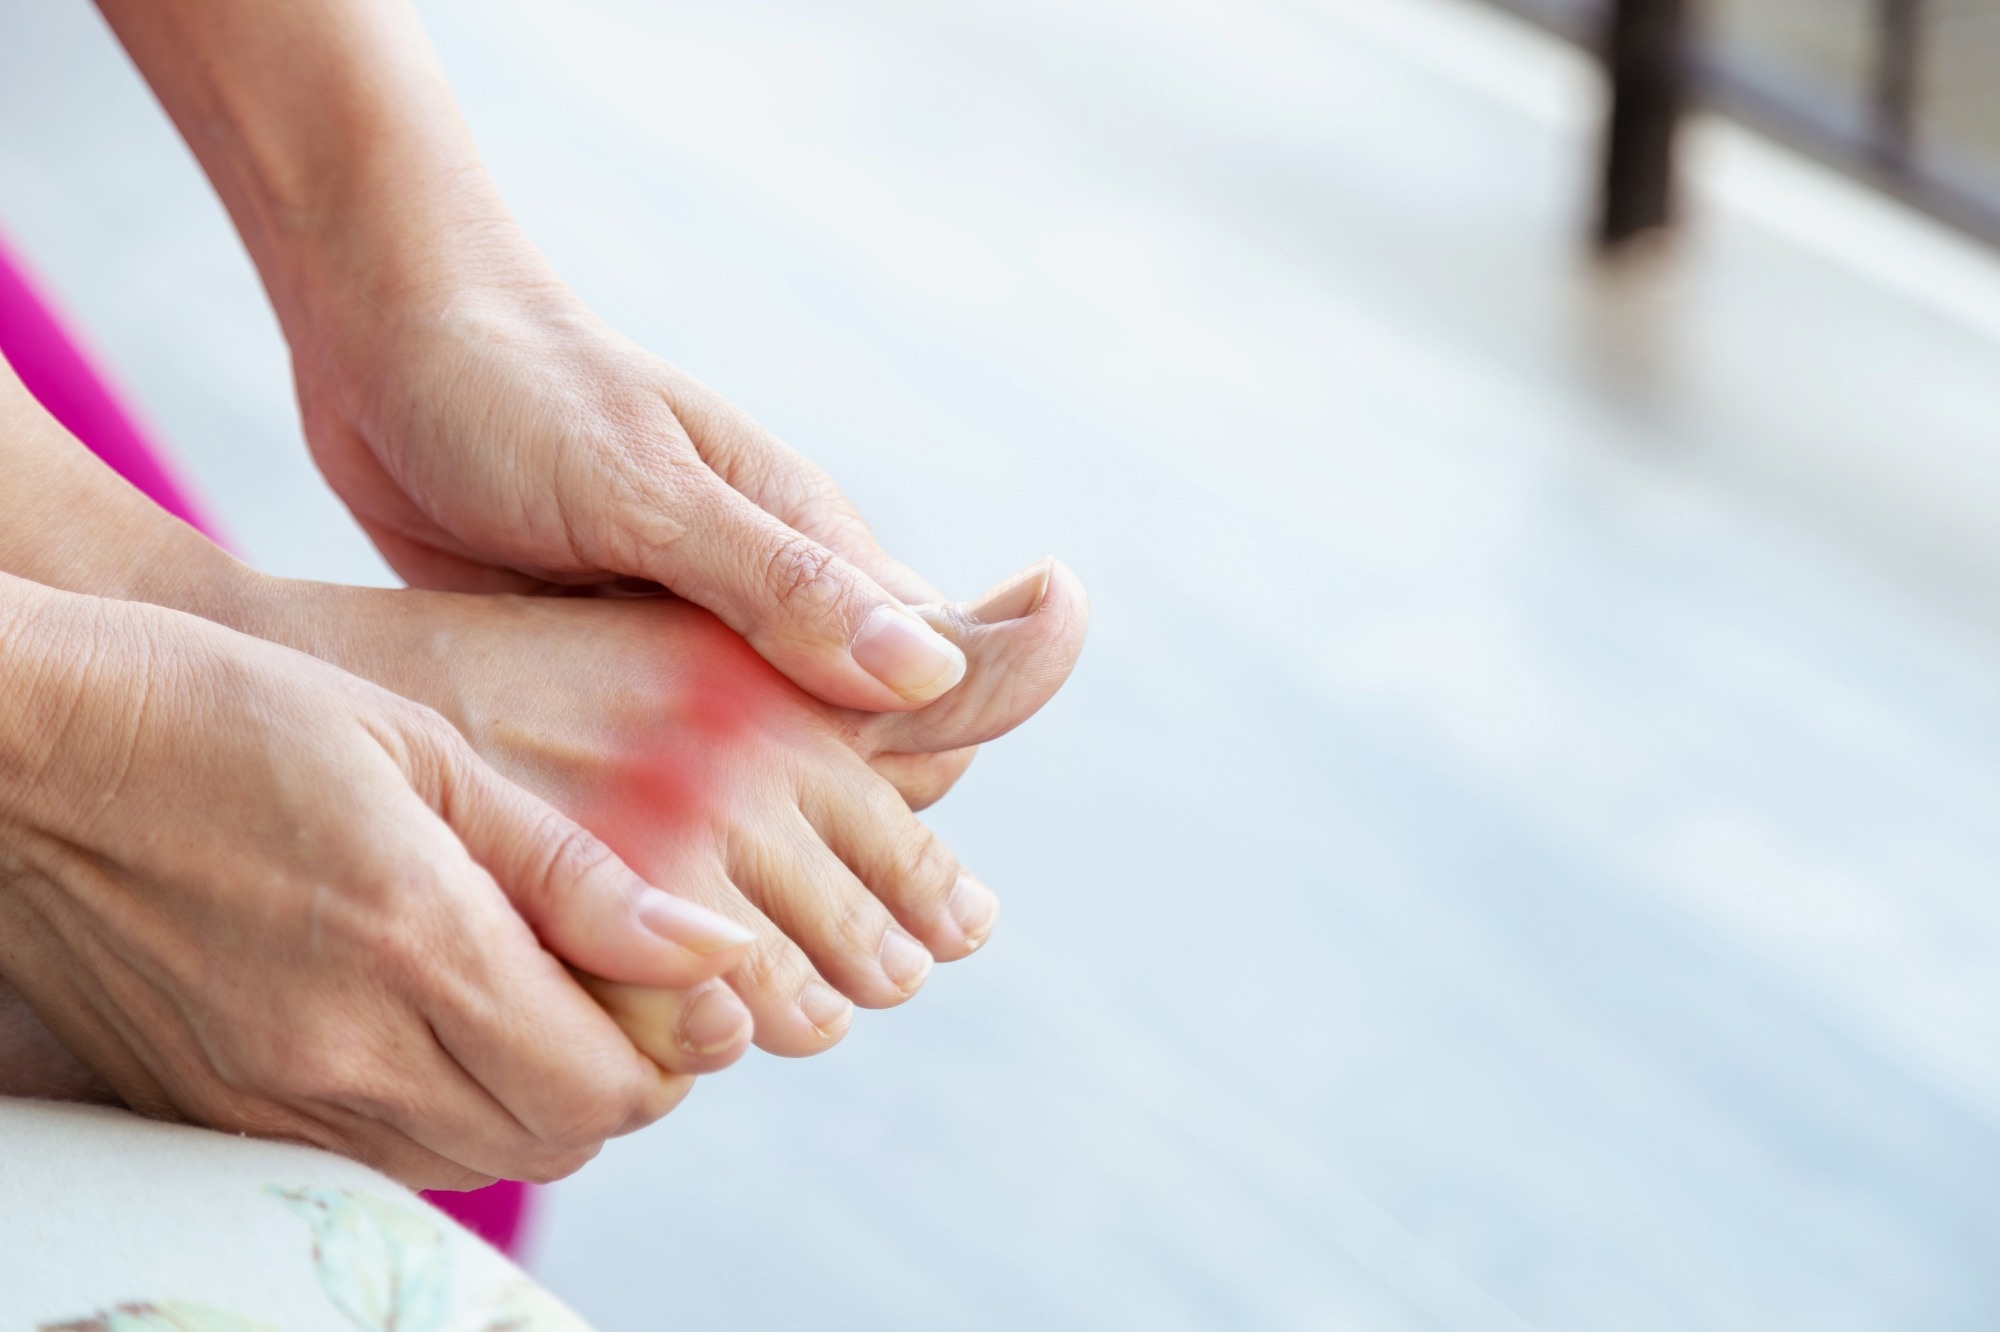 Study finds no link between gout and neurodegenerative disease in the general population